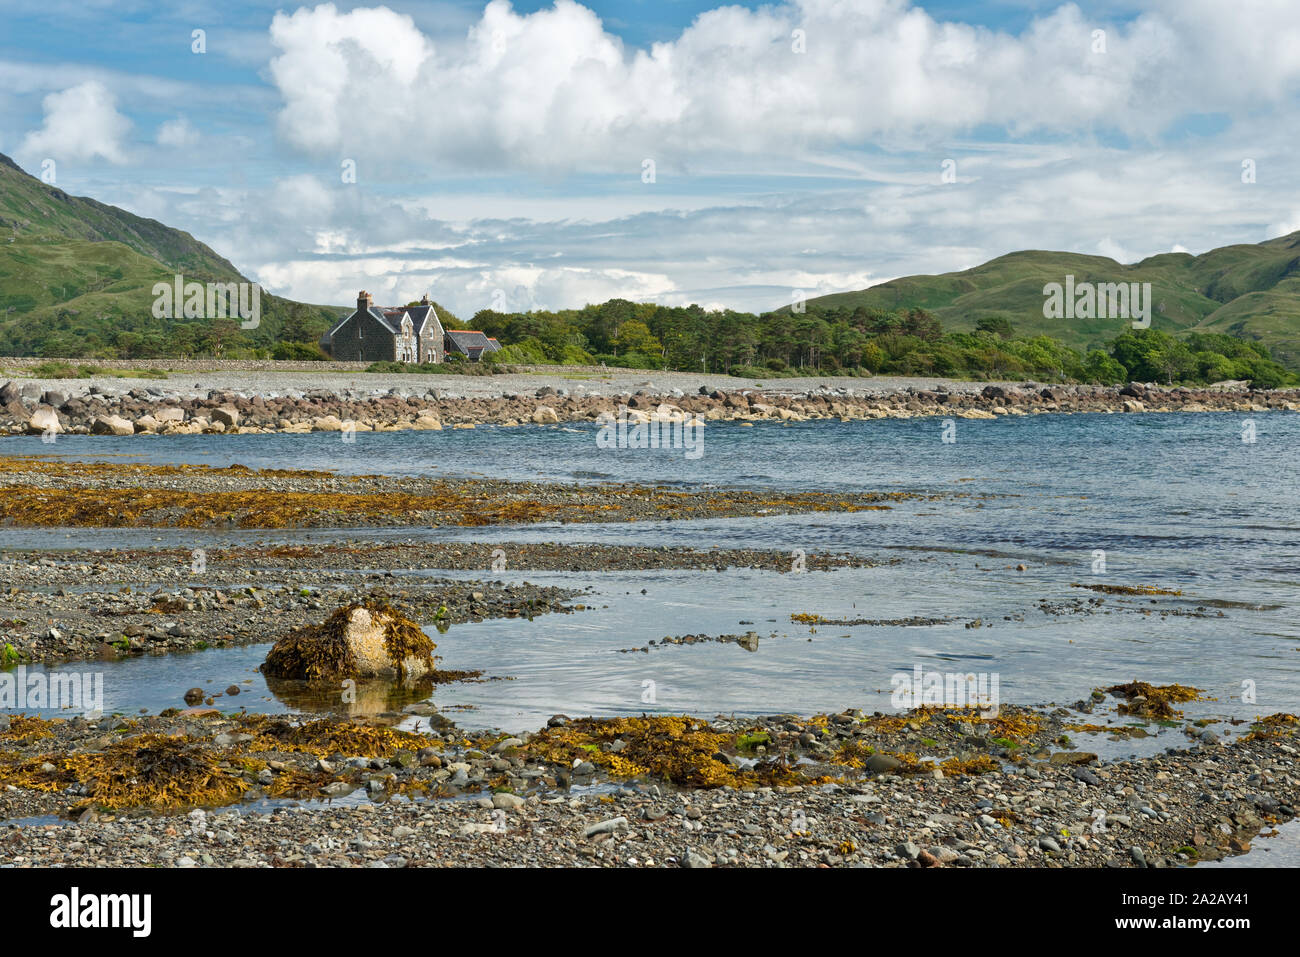 Tidal inlet and cottage. Isle of Mull, Scotland Stock Photo